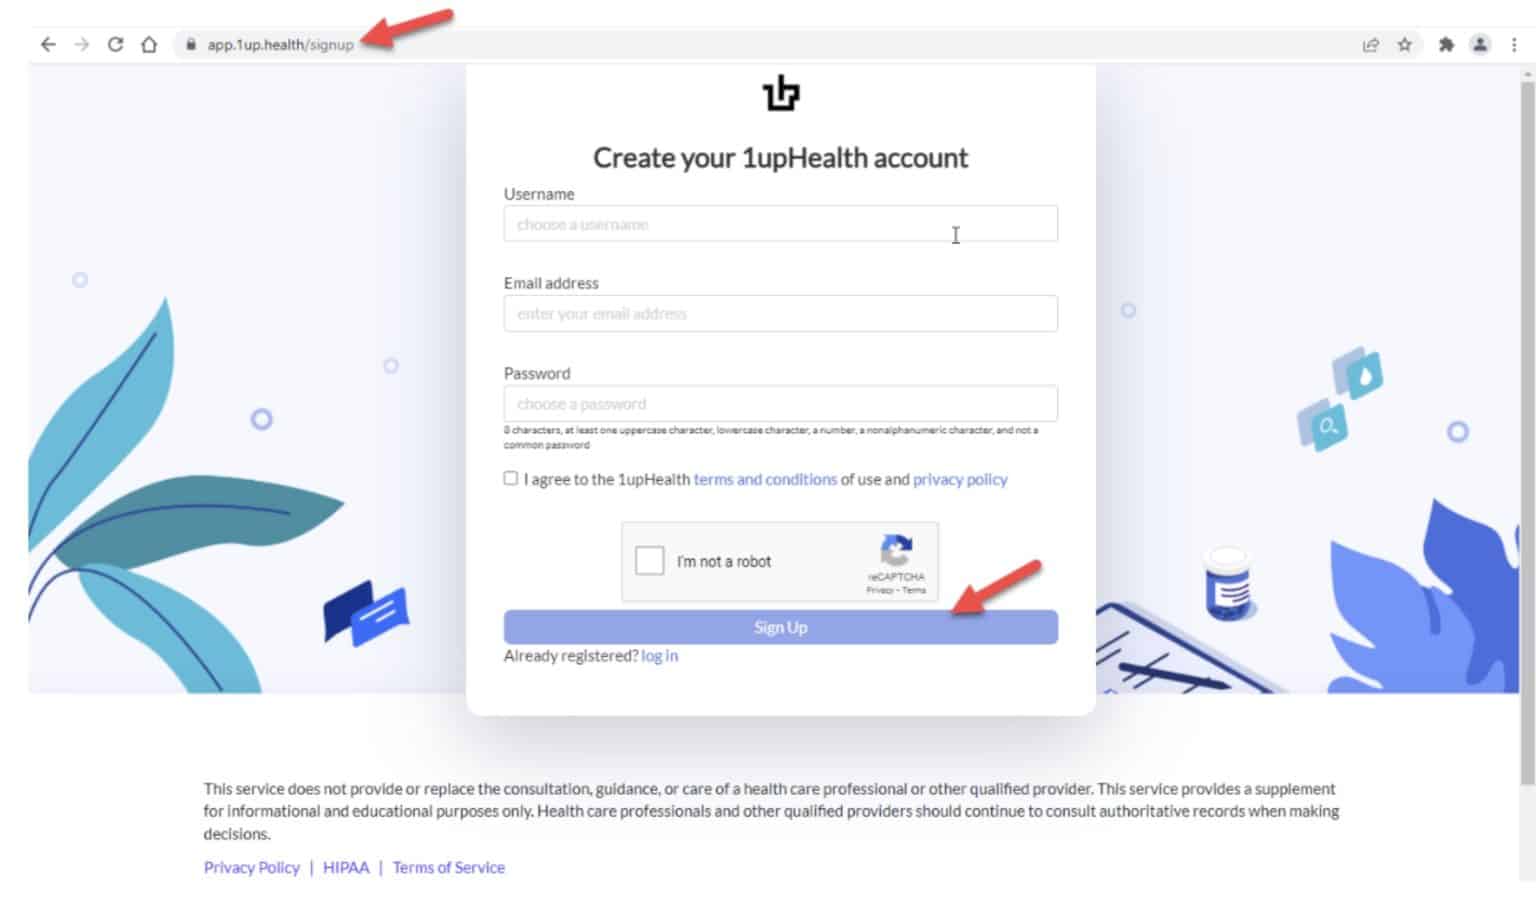 Screenshot of the 1upHealth.com website with a white pop-up window asking a user to enter user name, email address, and password to create an account